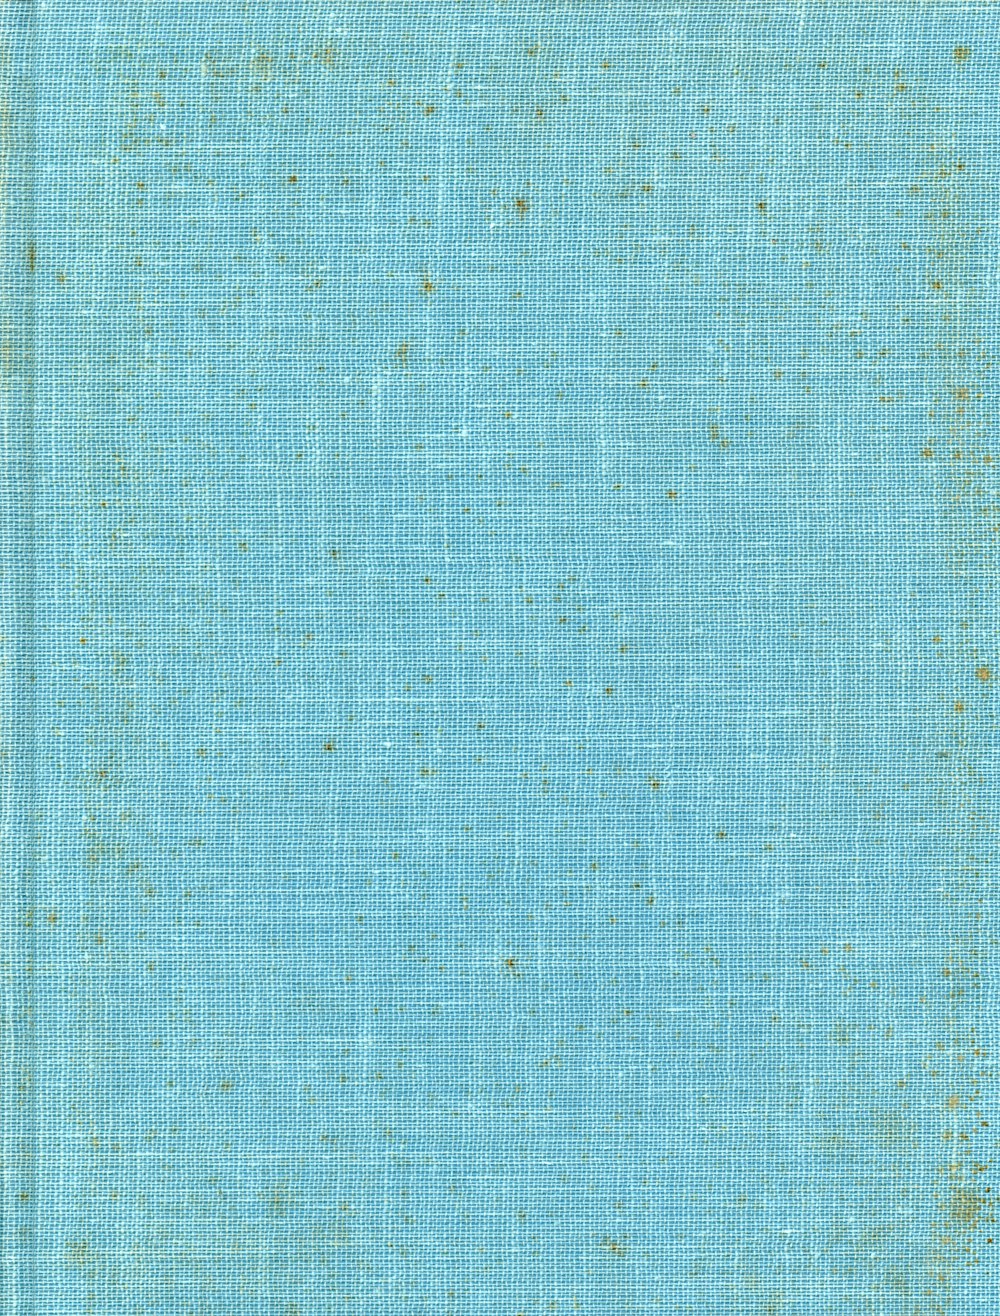 a blue book with gold speckles on it